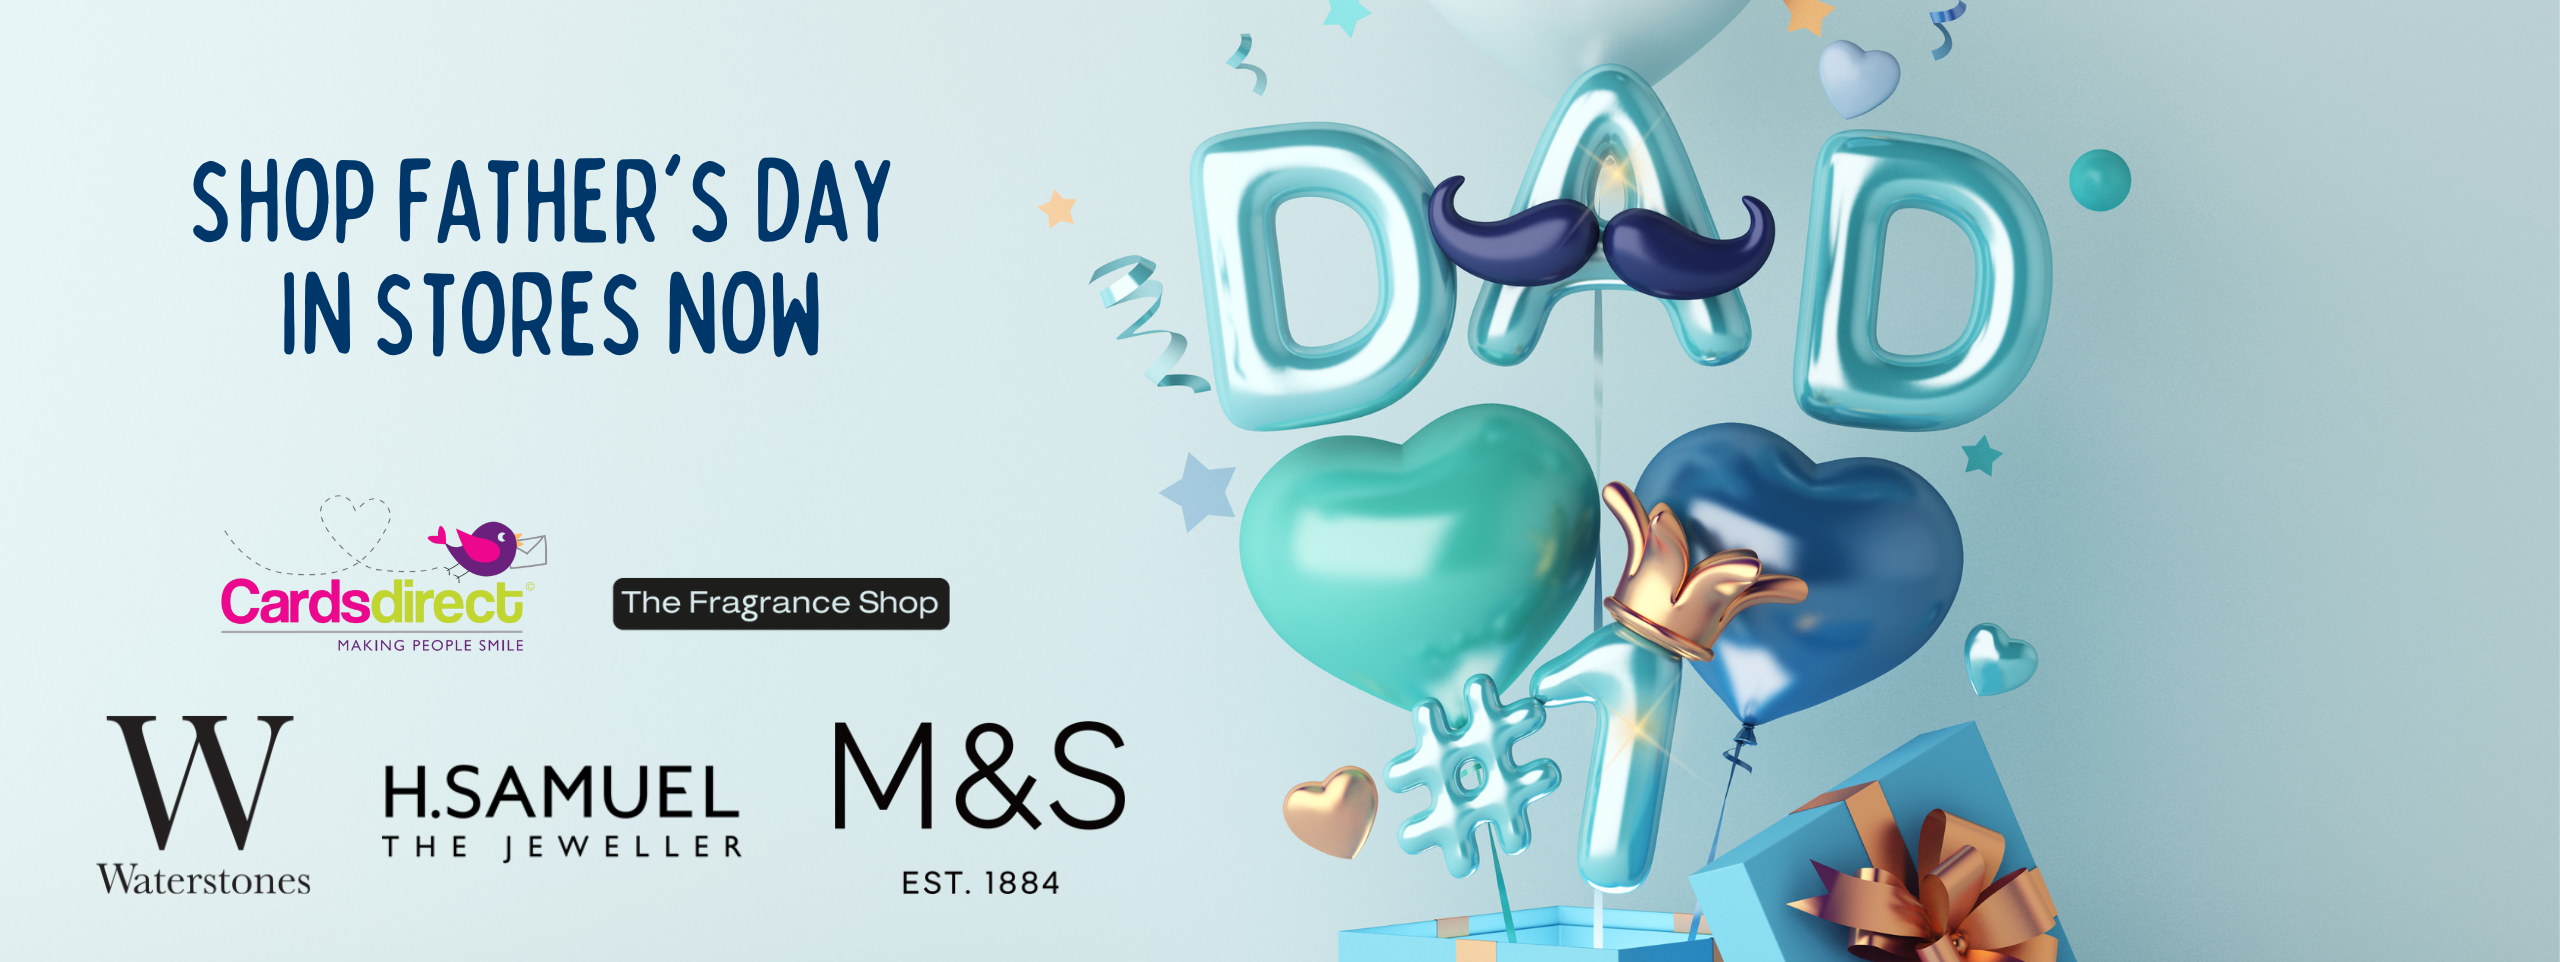 shop father’s day in stores now (2560 × 962px)